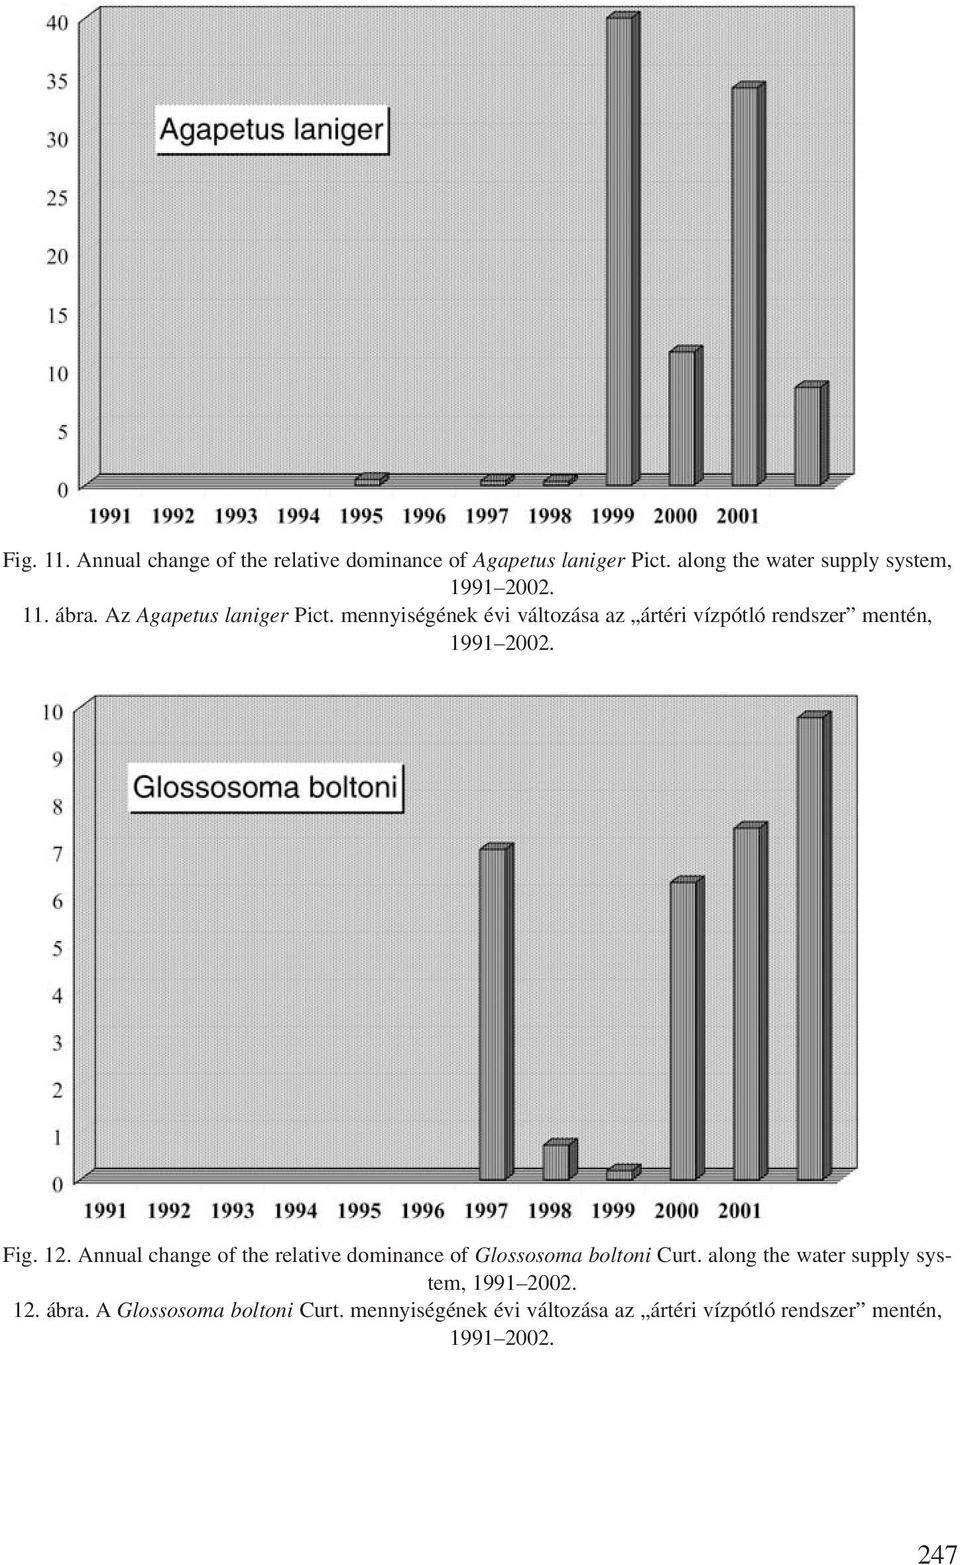 12. Annual change of the relative dominance of Glossosoma boltoni Curt. along the water supply system, 1991 2002.